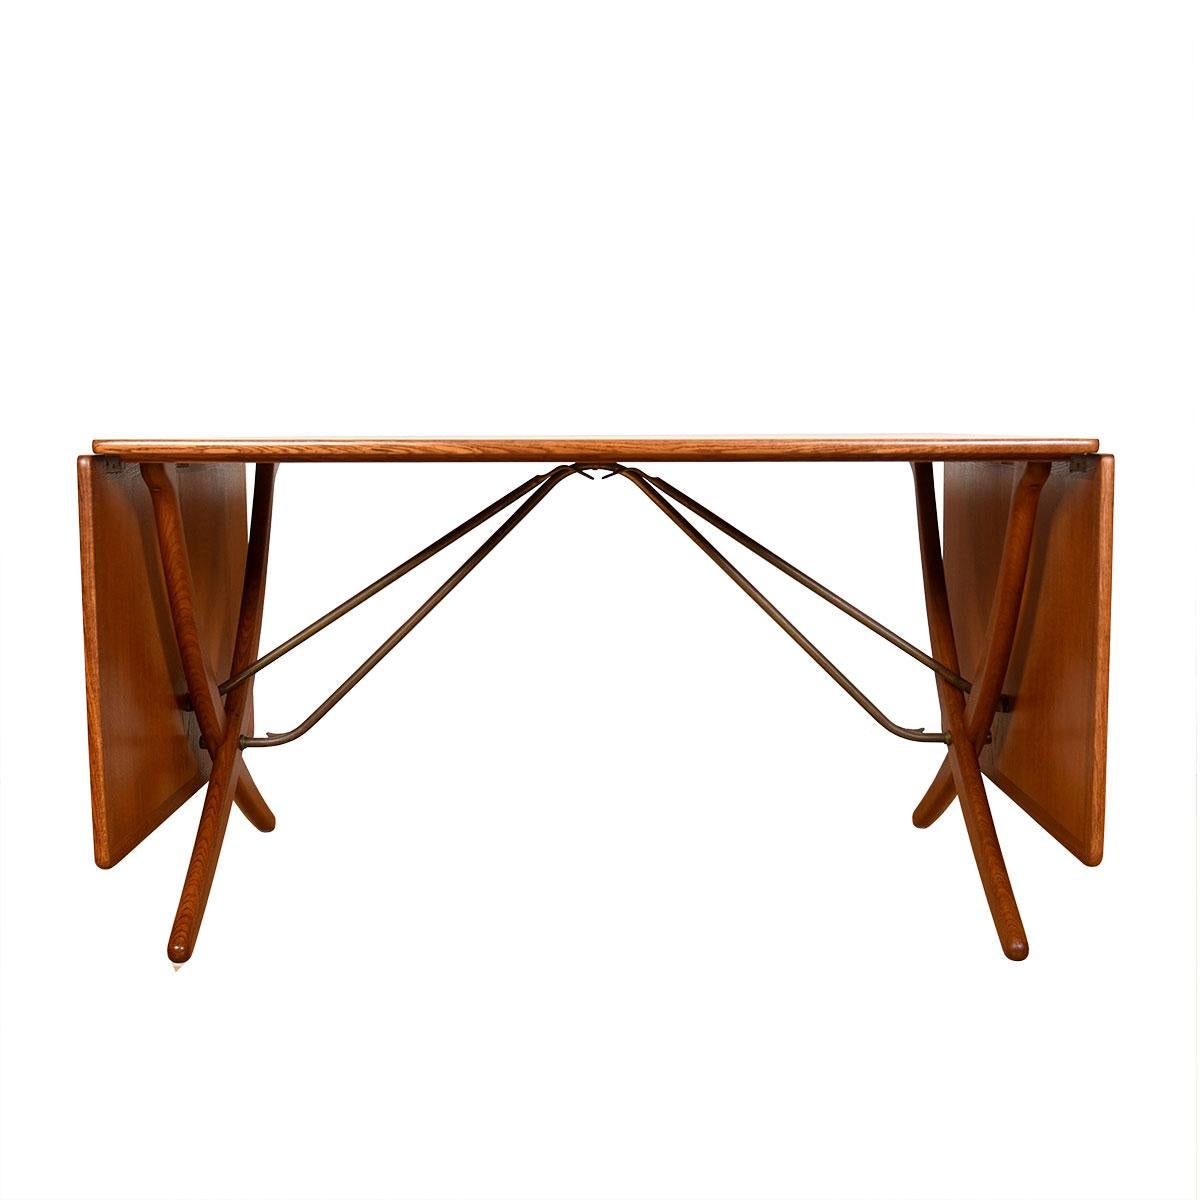 “Saw Horse” Extendable Dining Table in Oak by Hans Wegner for Andreas Tuck,1950s

Additional information:
Material: Oak
Featured at DC:
A very hard to come by example of this table with both an oak top & oak legs.
The smaller model of the